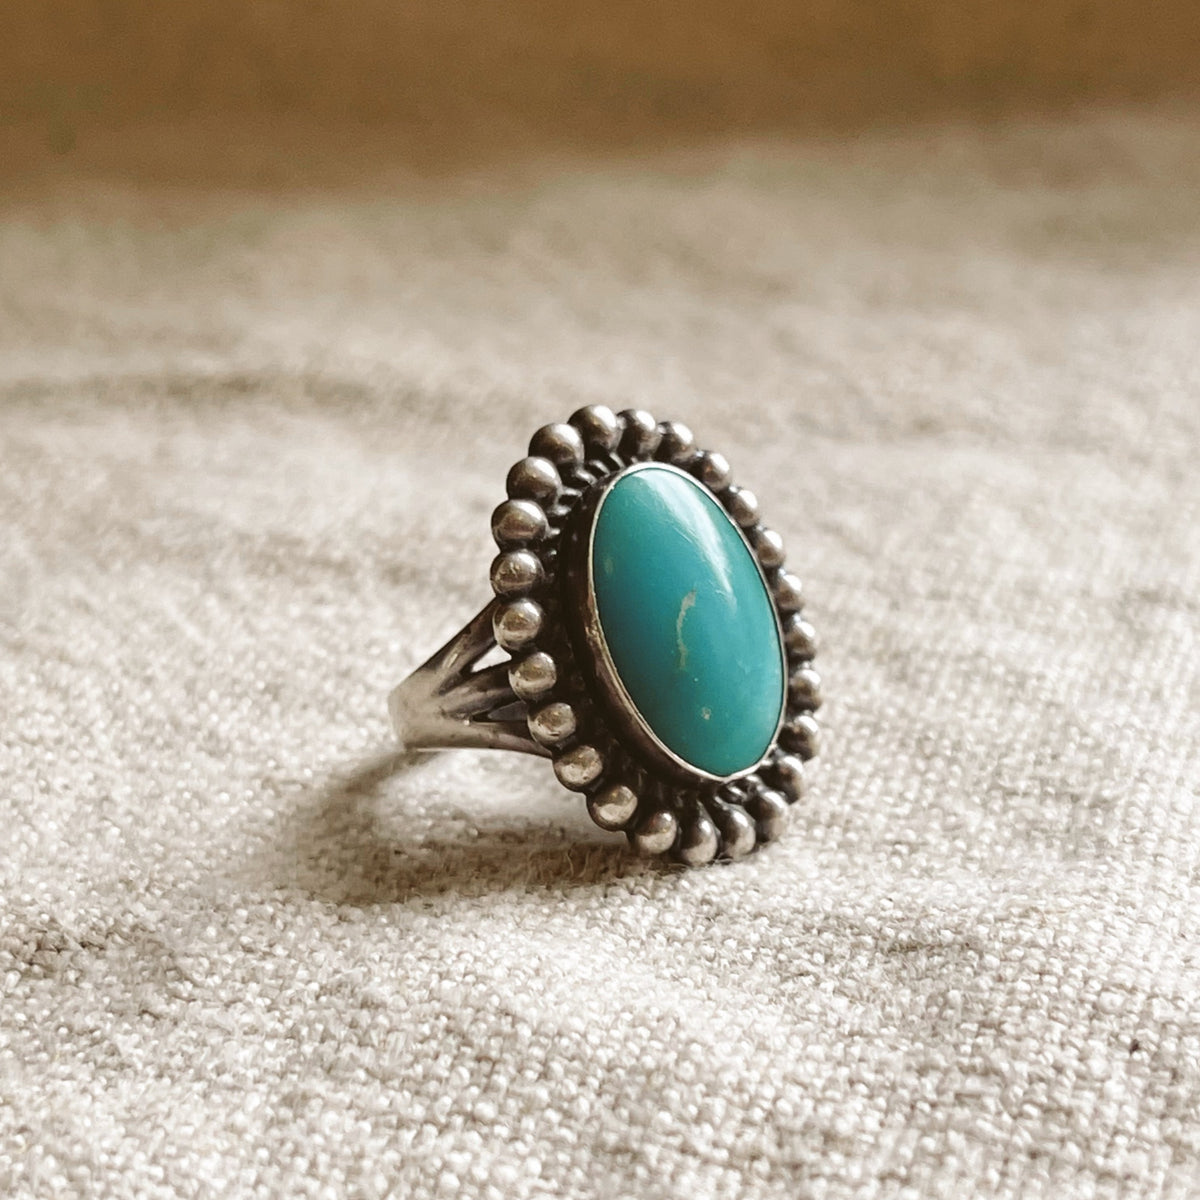 Explore The Astrological Benefits Of Turquoise Stone - InstaAstro